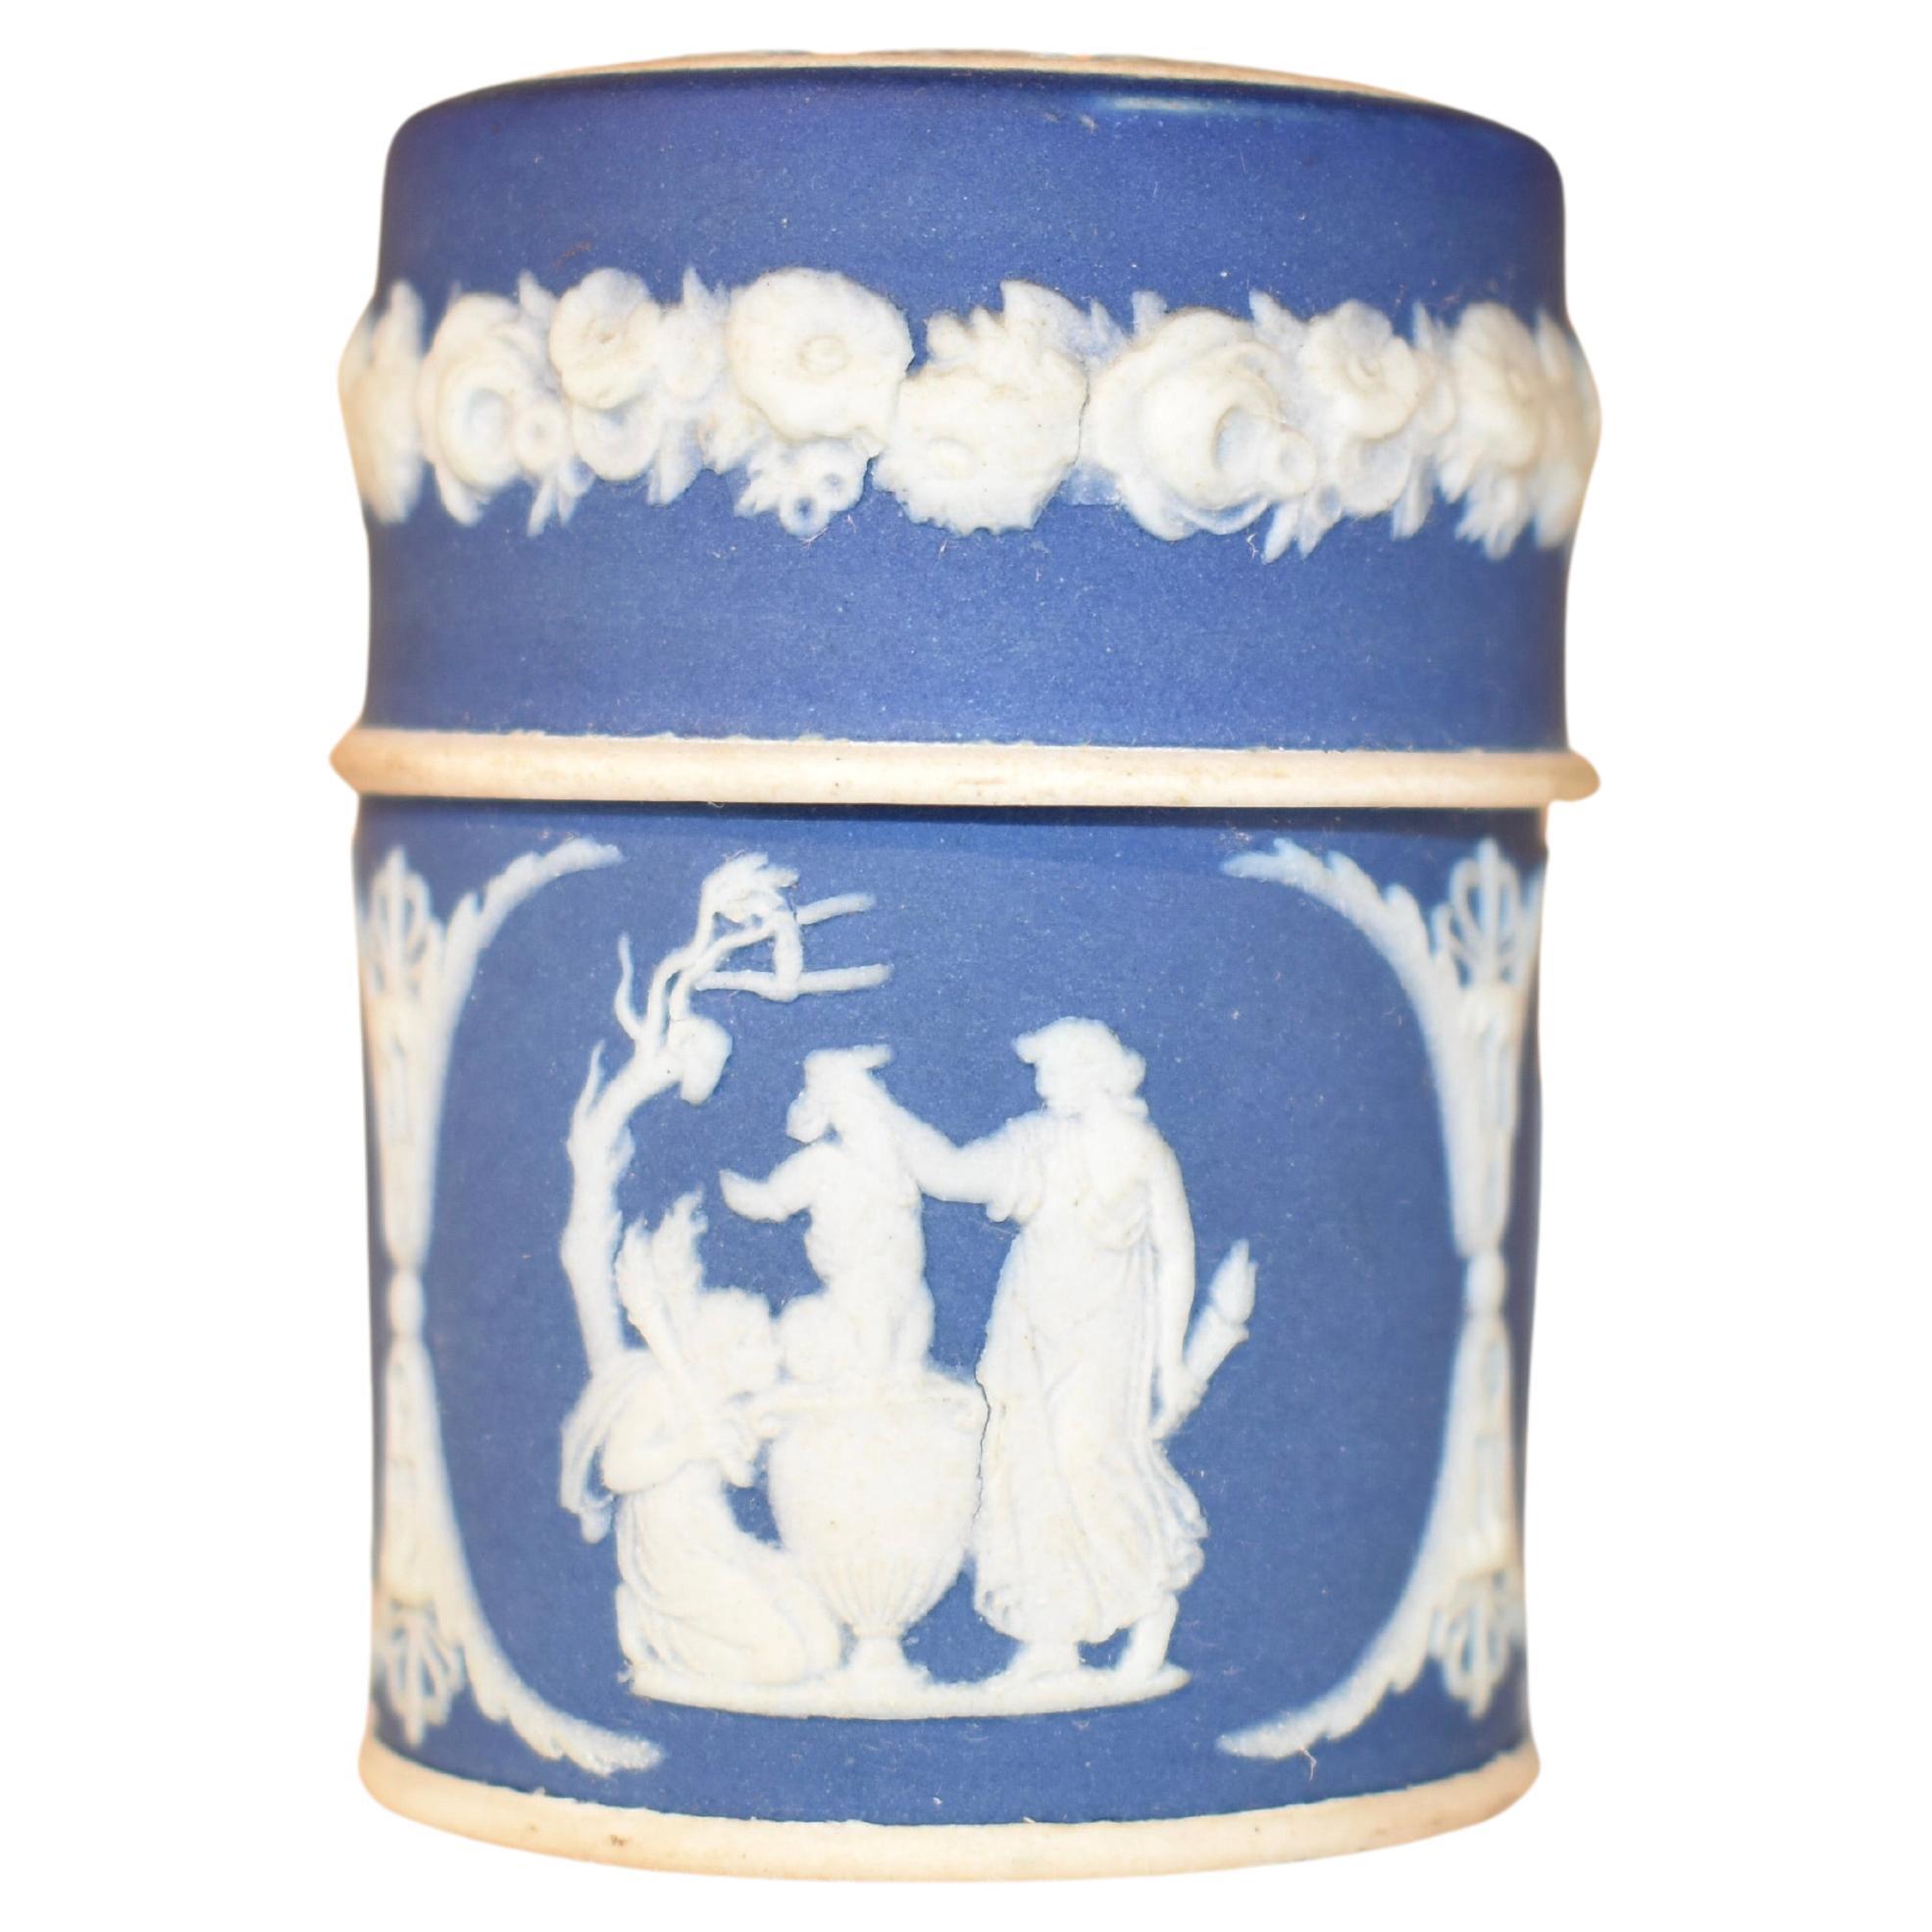 How can you tell if Wedgwood is real?